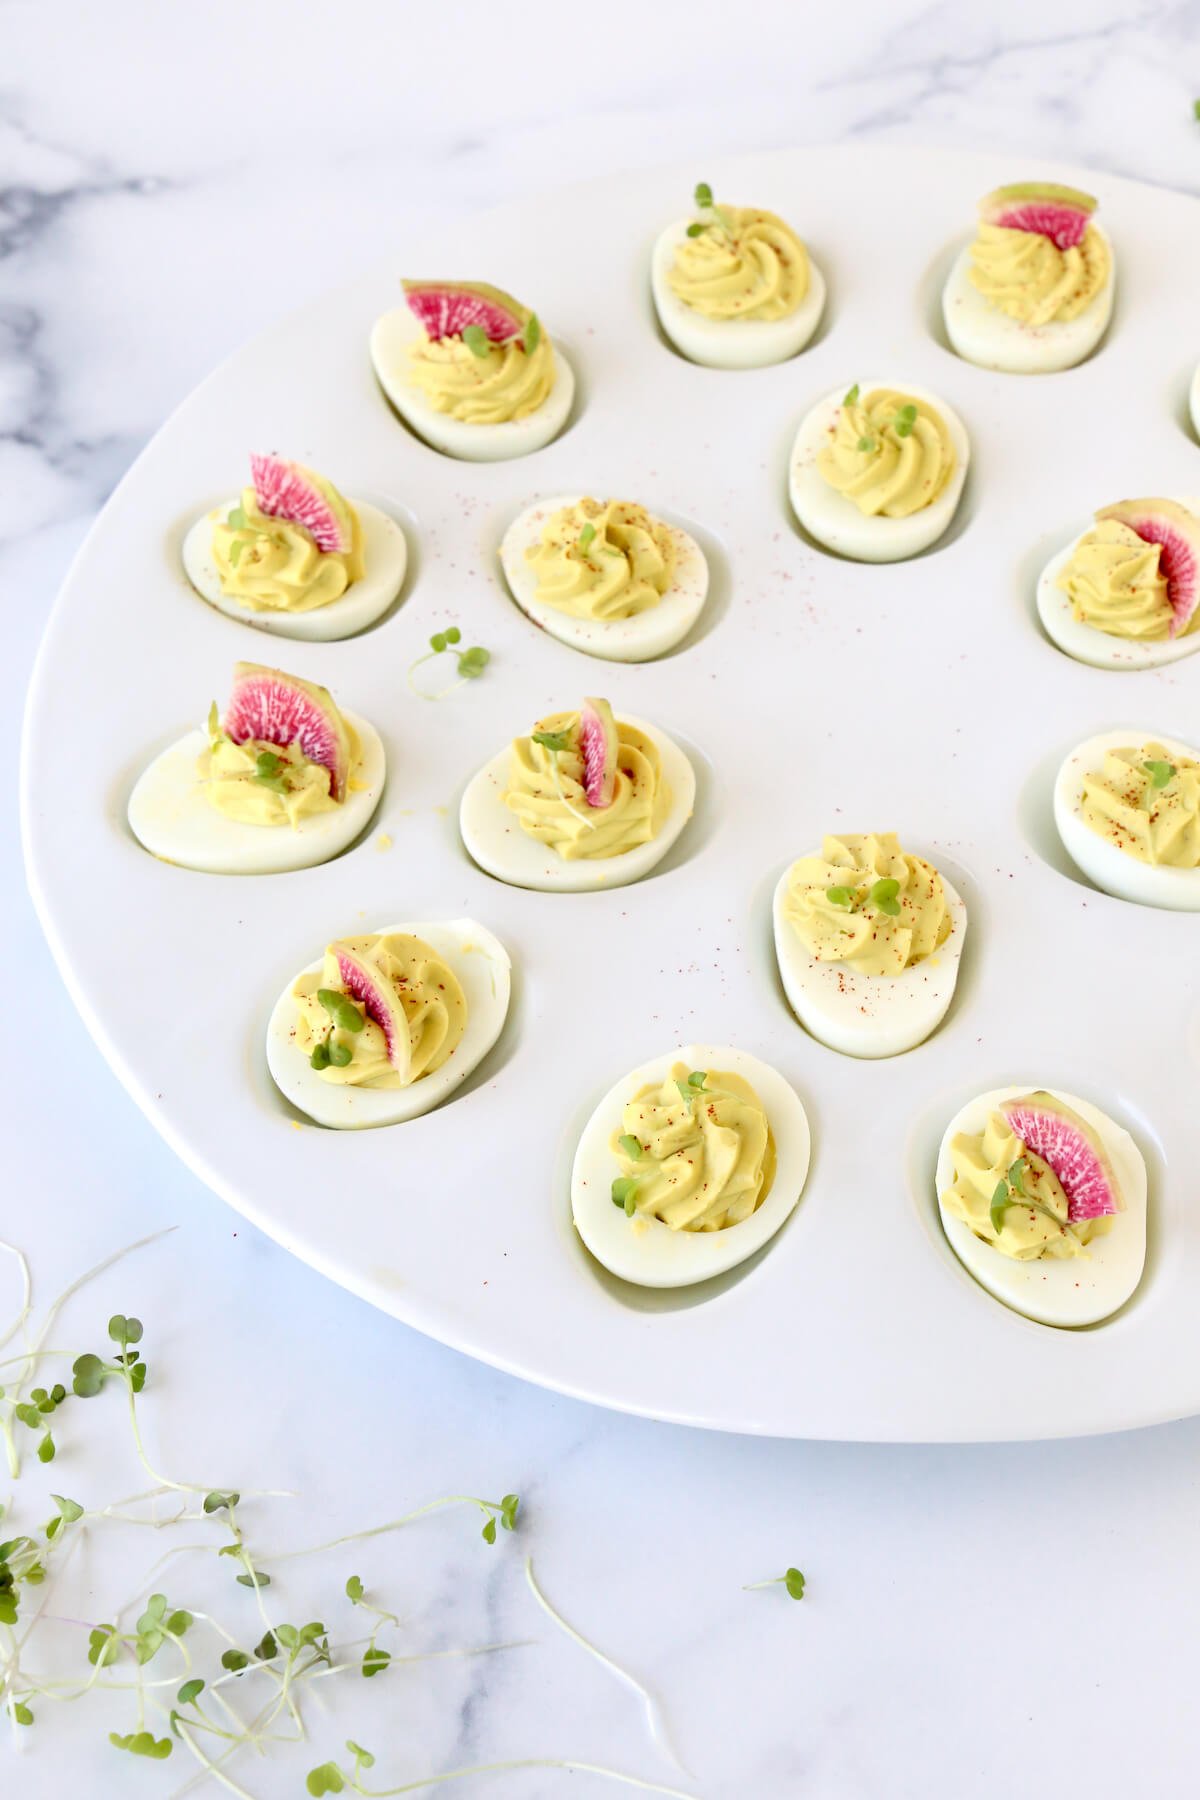 A platter of eggs filled with avocado cream topped with watermelon radishes and micro greens.  